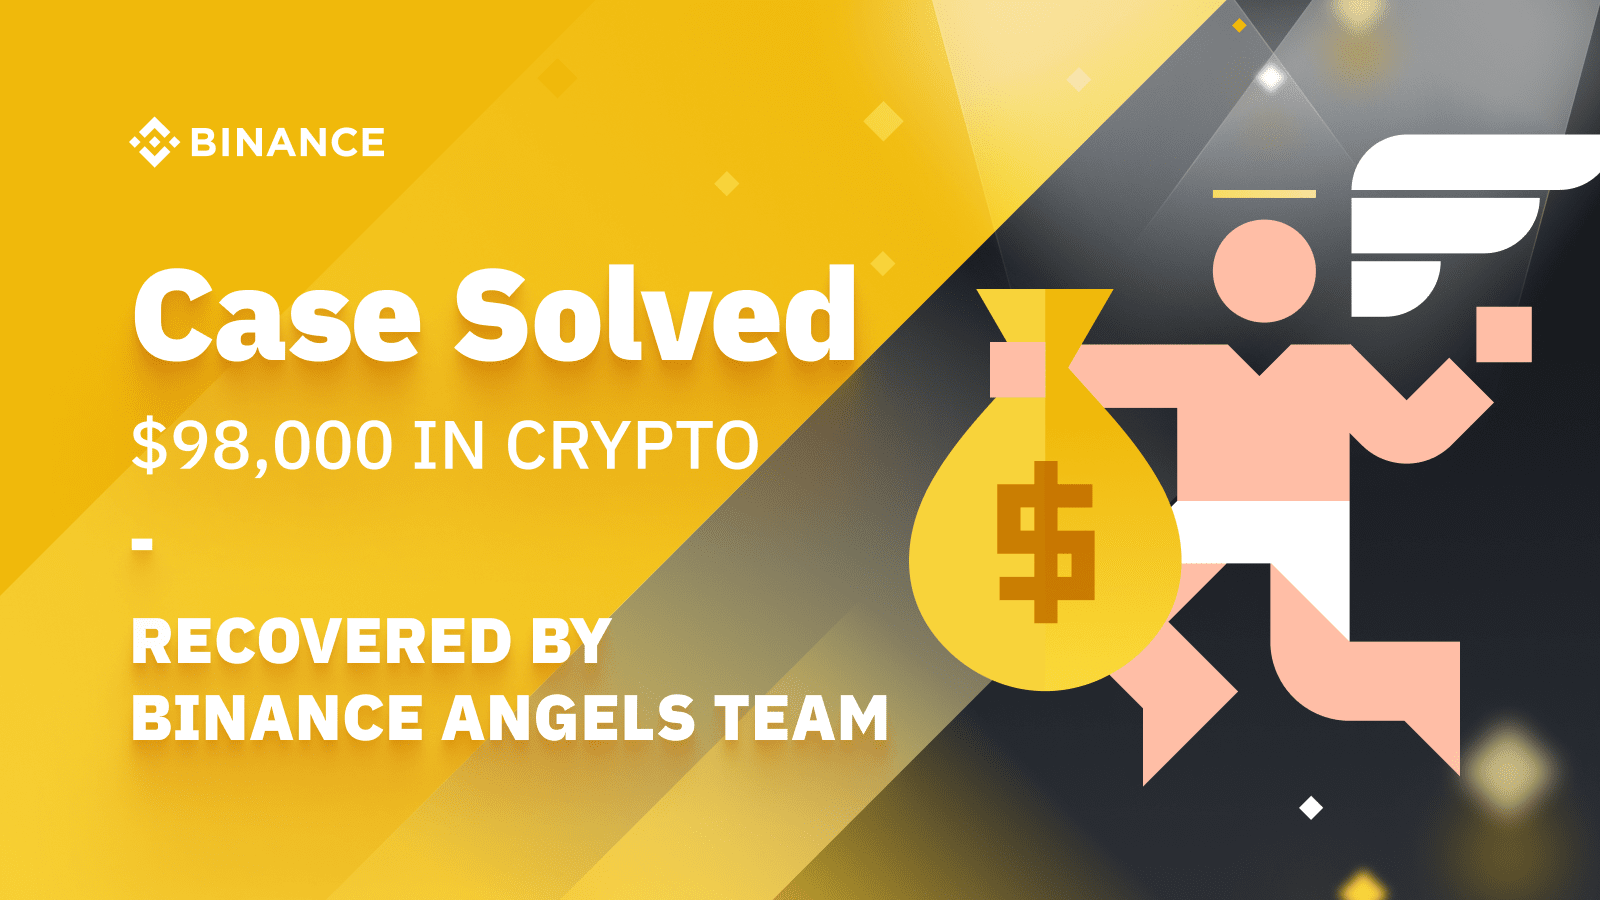 Case Solved: How Binance Angels Recovered $98,000 in Crypto On Behalf of a Binance User